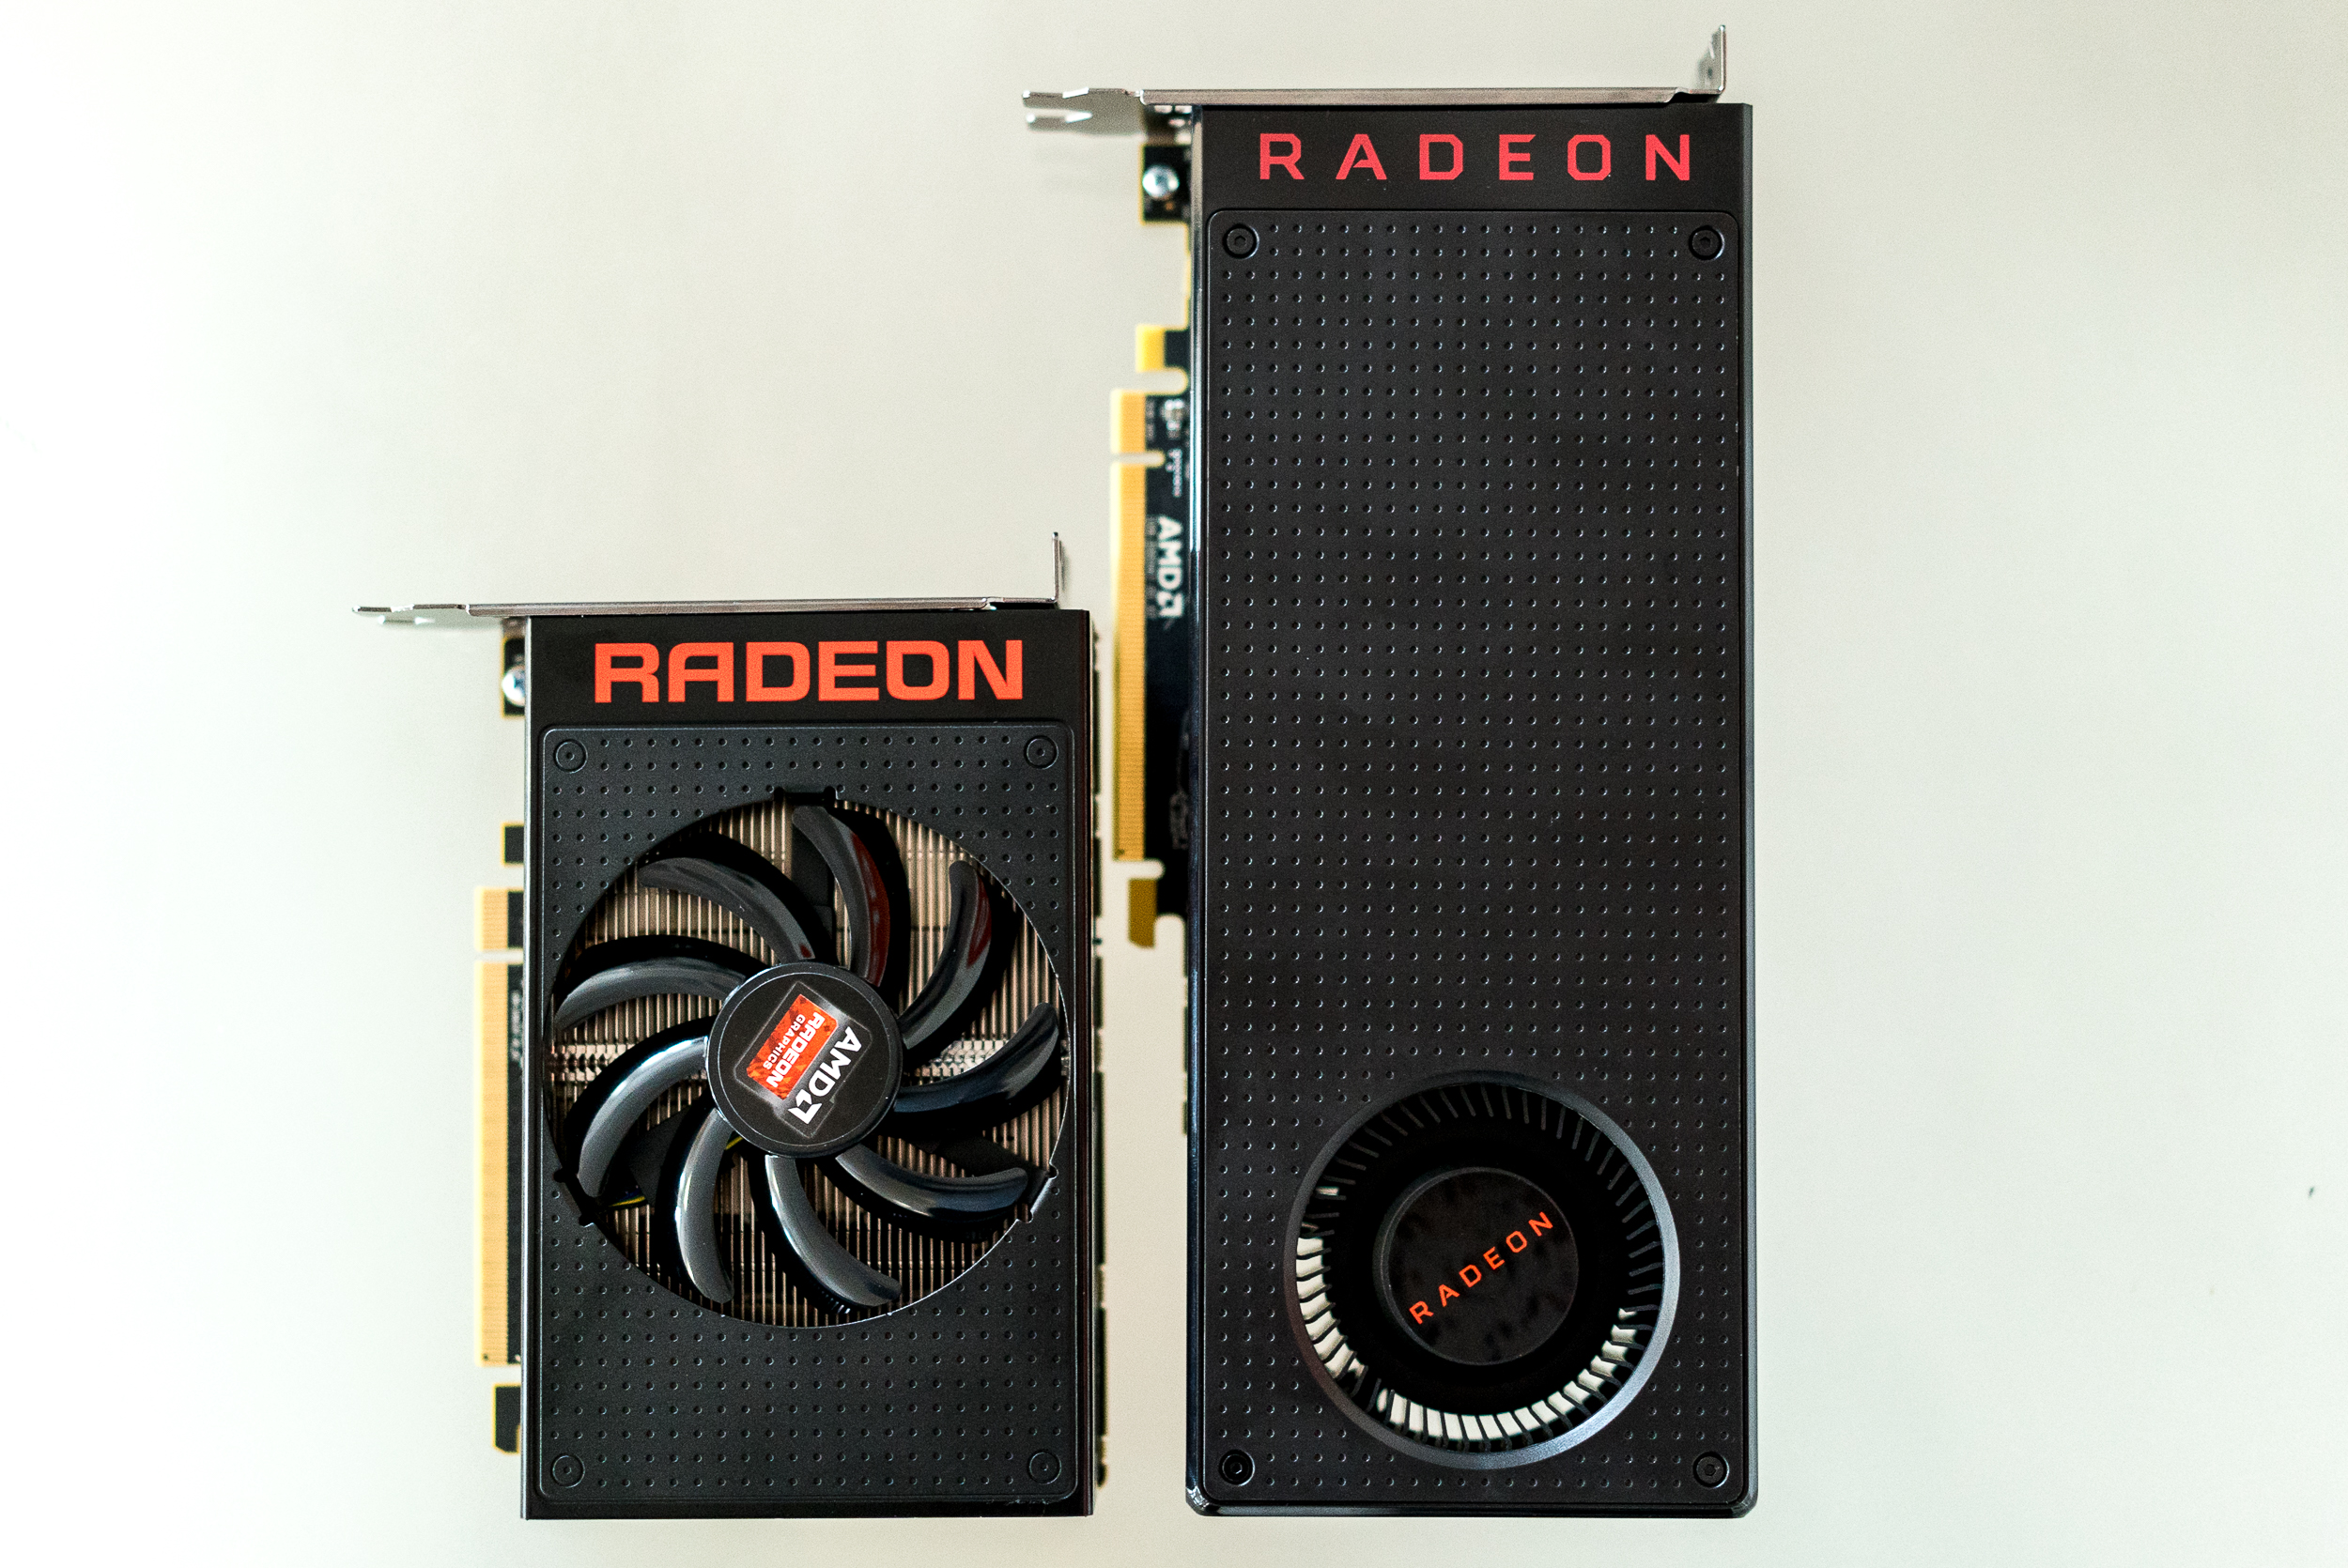 AMD RX 480 review: The best budget 